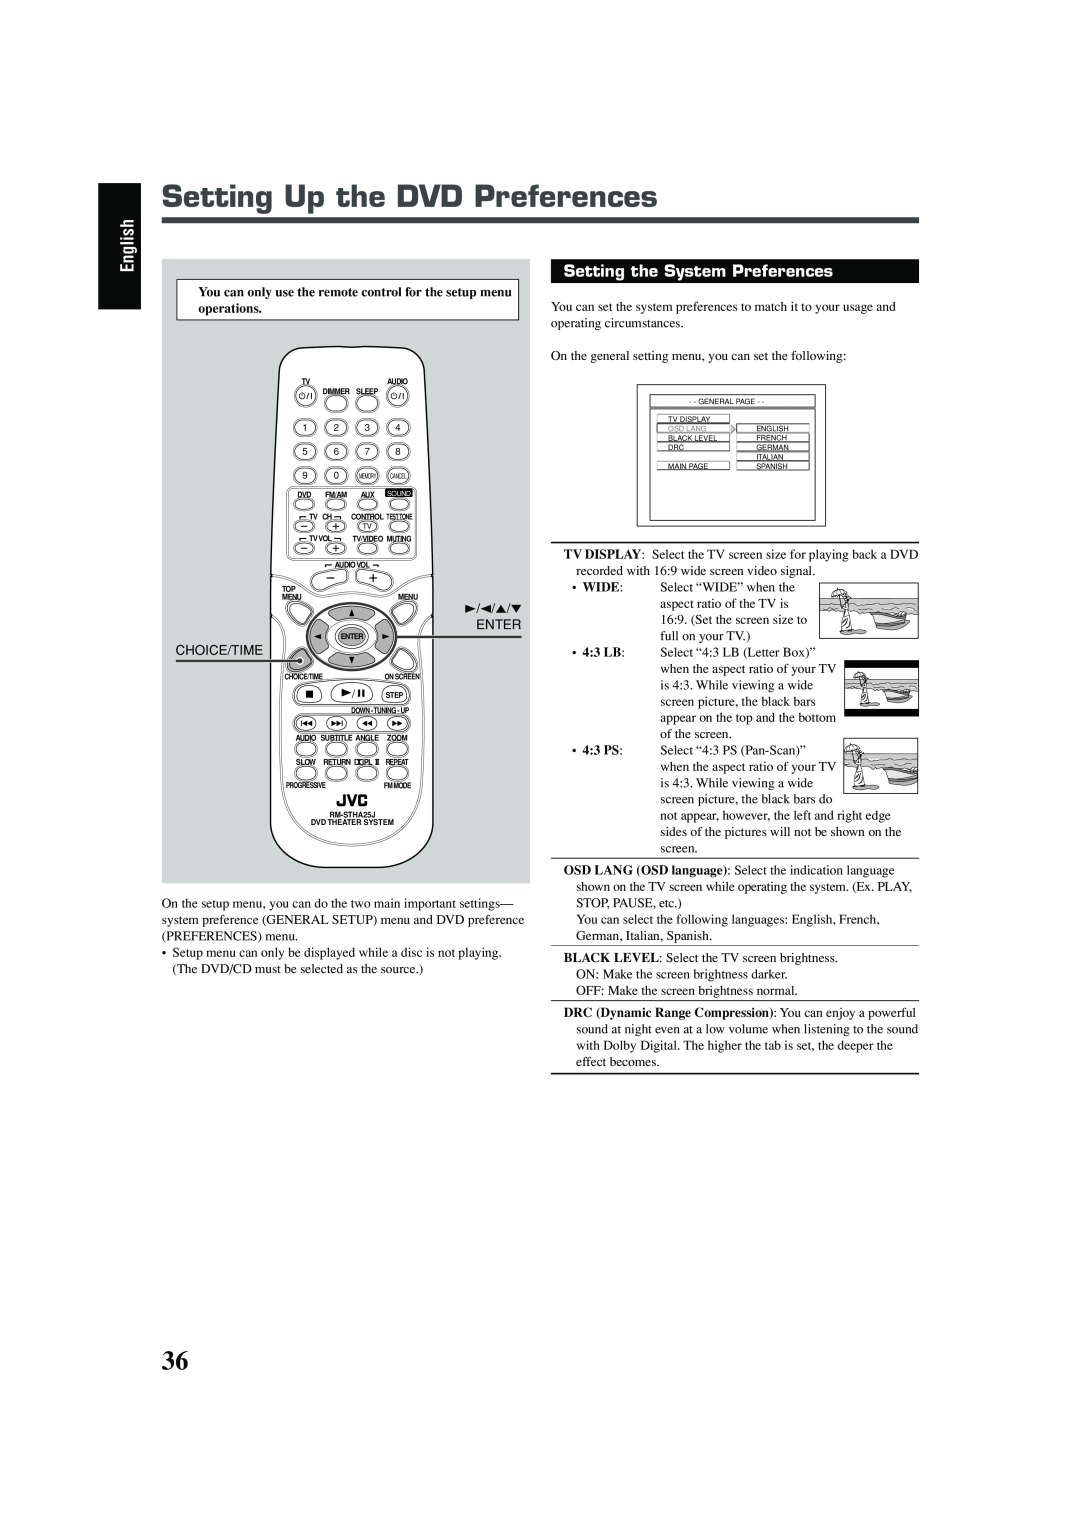 JVC TH-A25 manual Setting Up the DVD Preferences, English, Setting the System Preferences, Enter, Choice/Time 